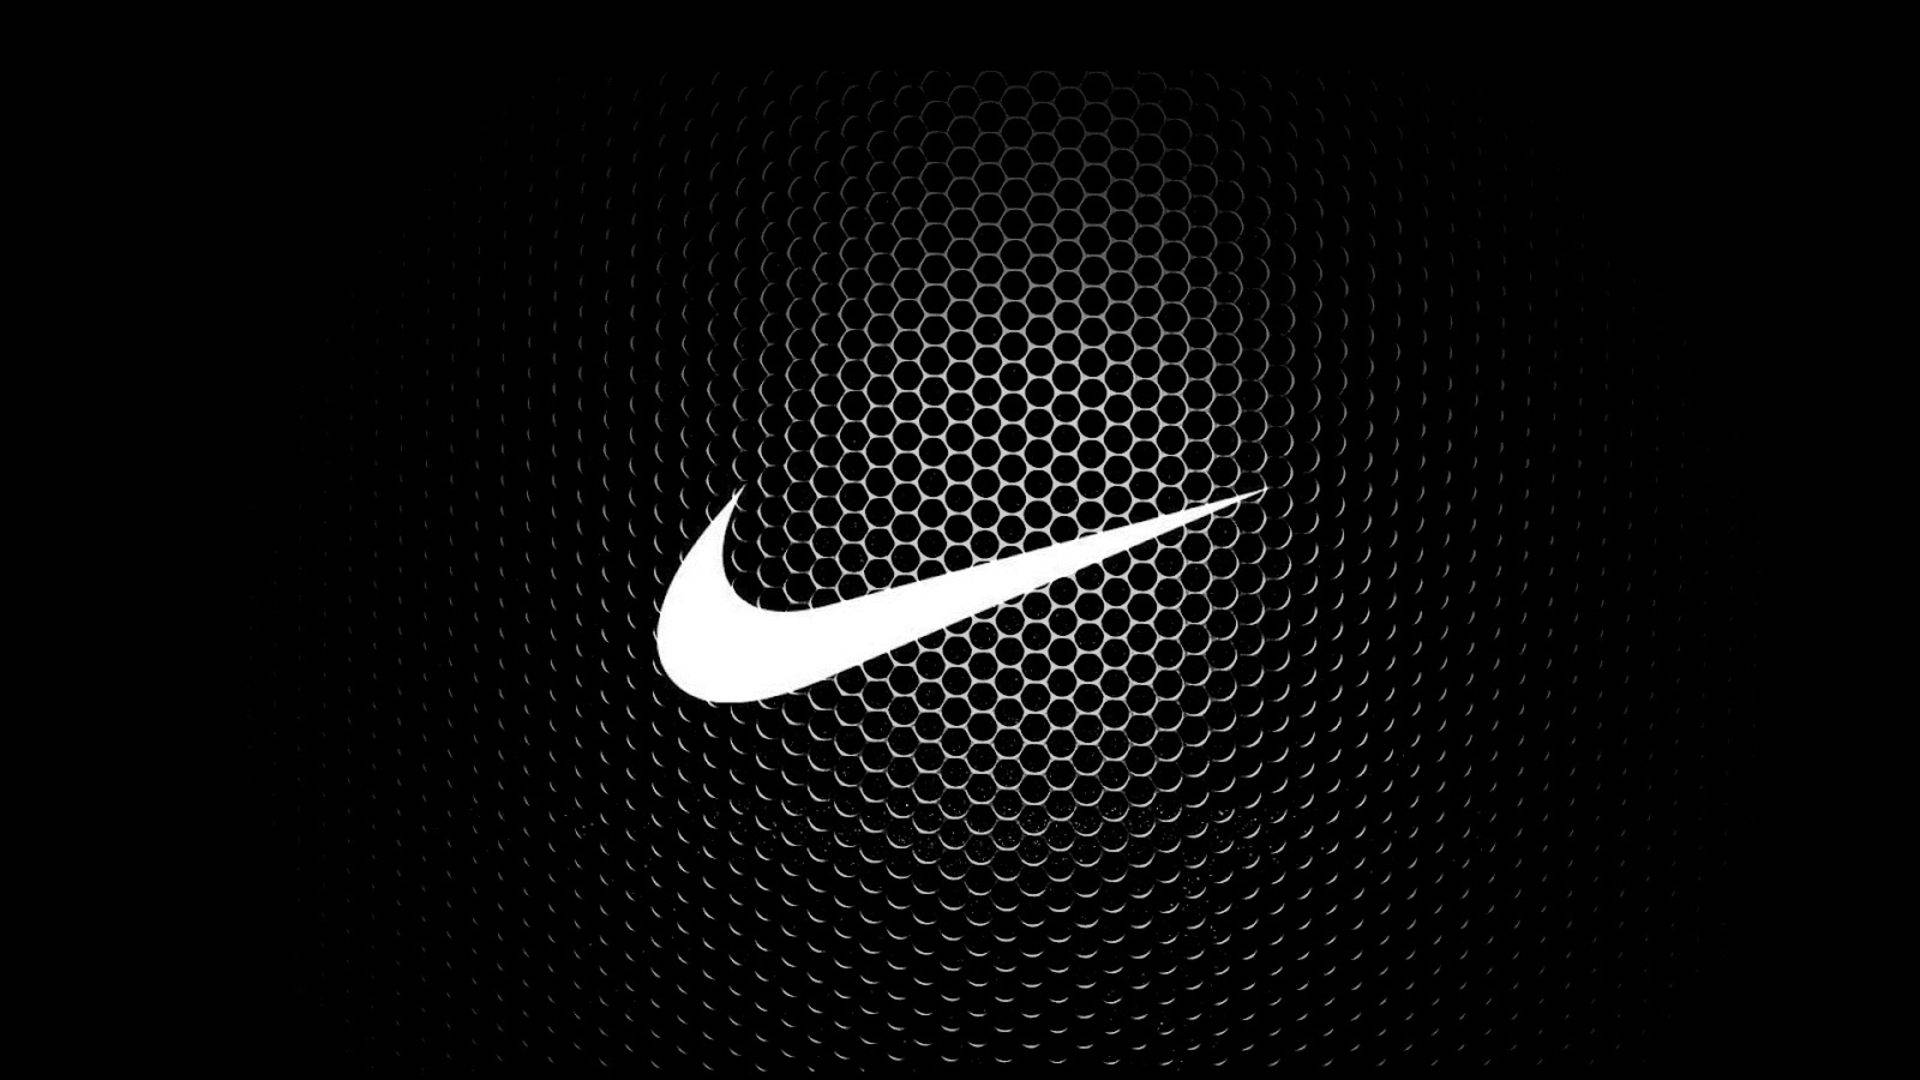 Nike Emblem With Cool Hexagon Pattern Background